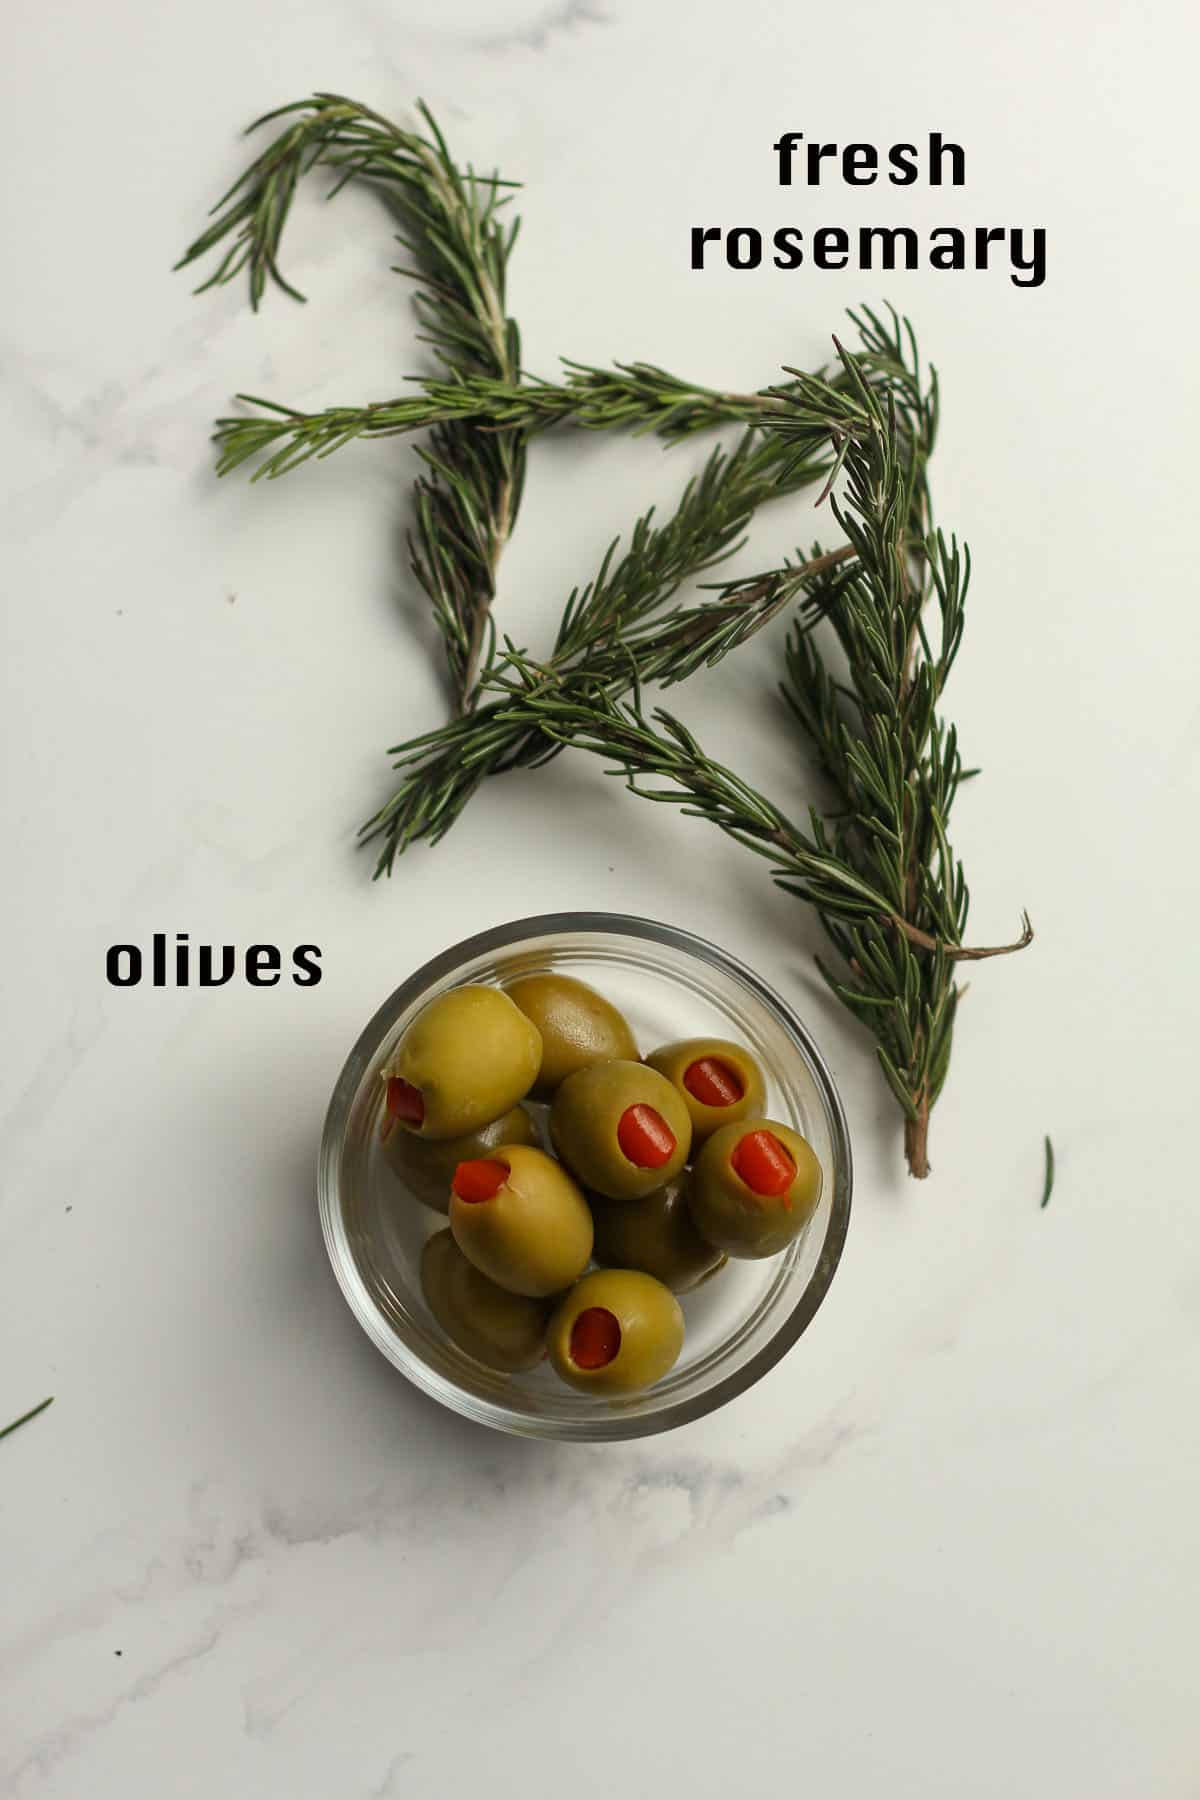 A bowl of green olives plus some fresh rosemary.